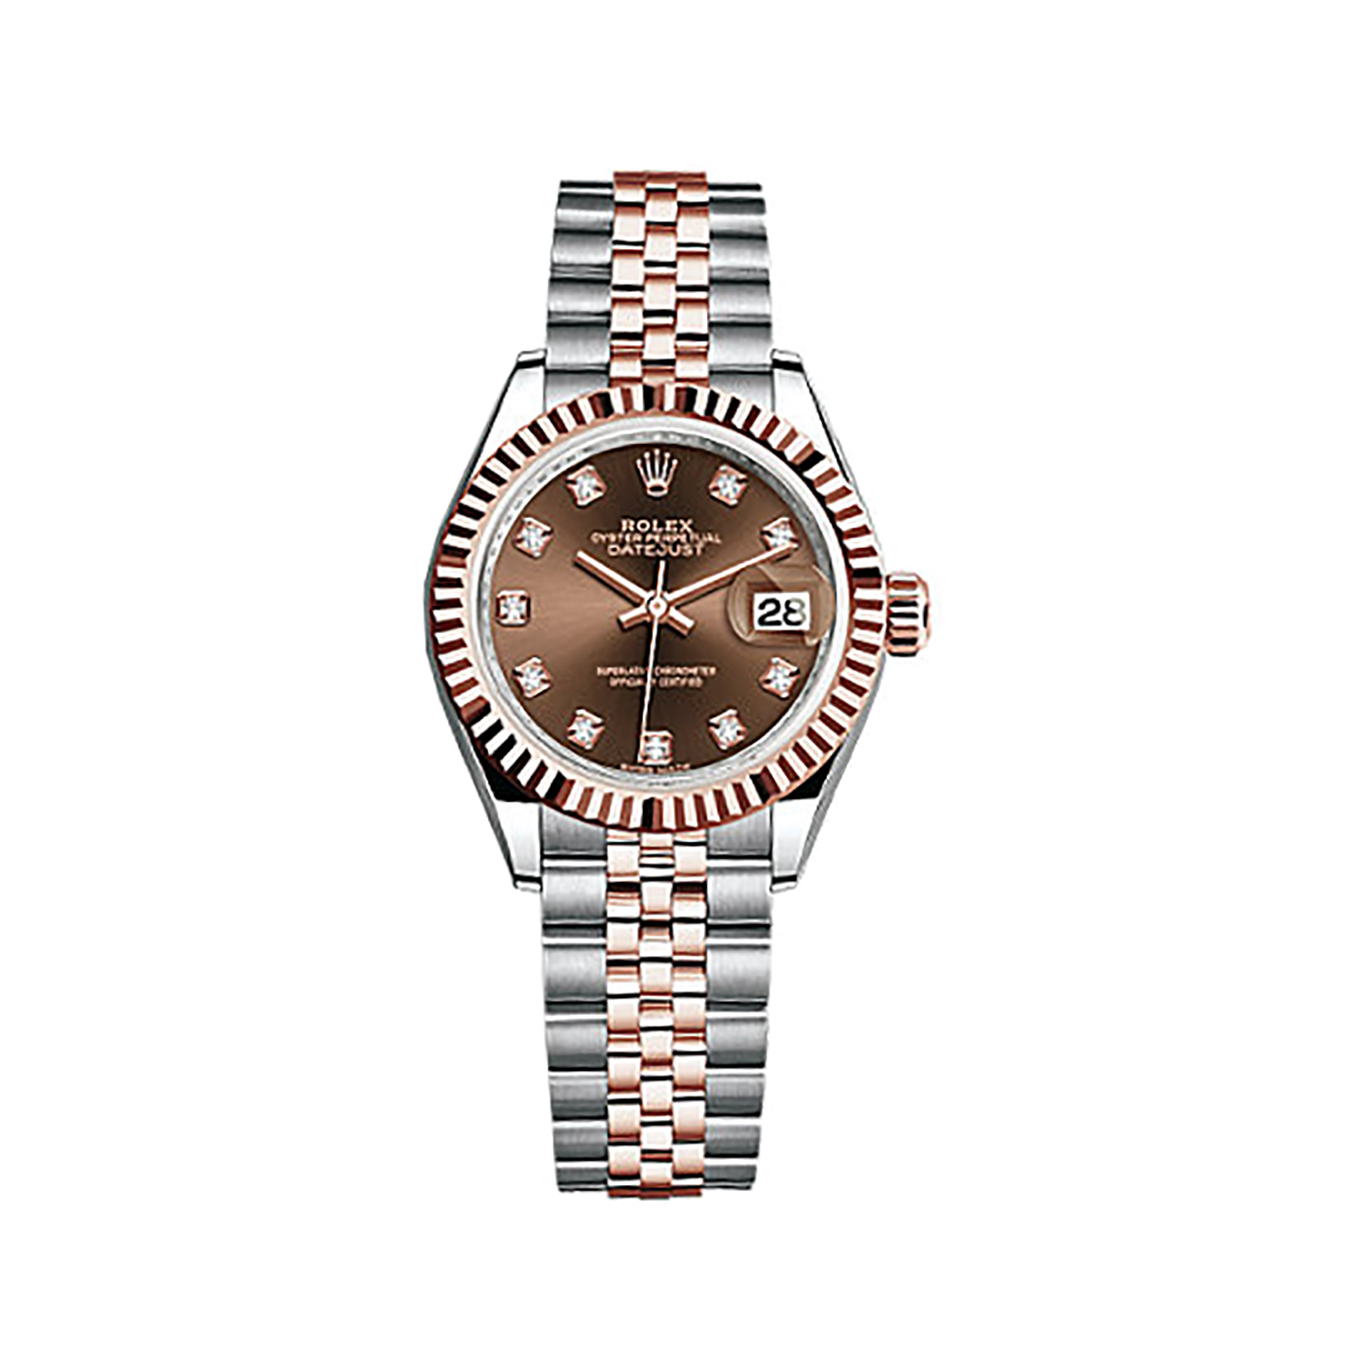 Lady-Datejust 28 279171 Rose Gold & Stainless Steel Watch (Chocolate Set with Diamonds)